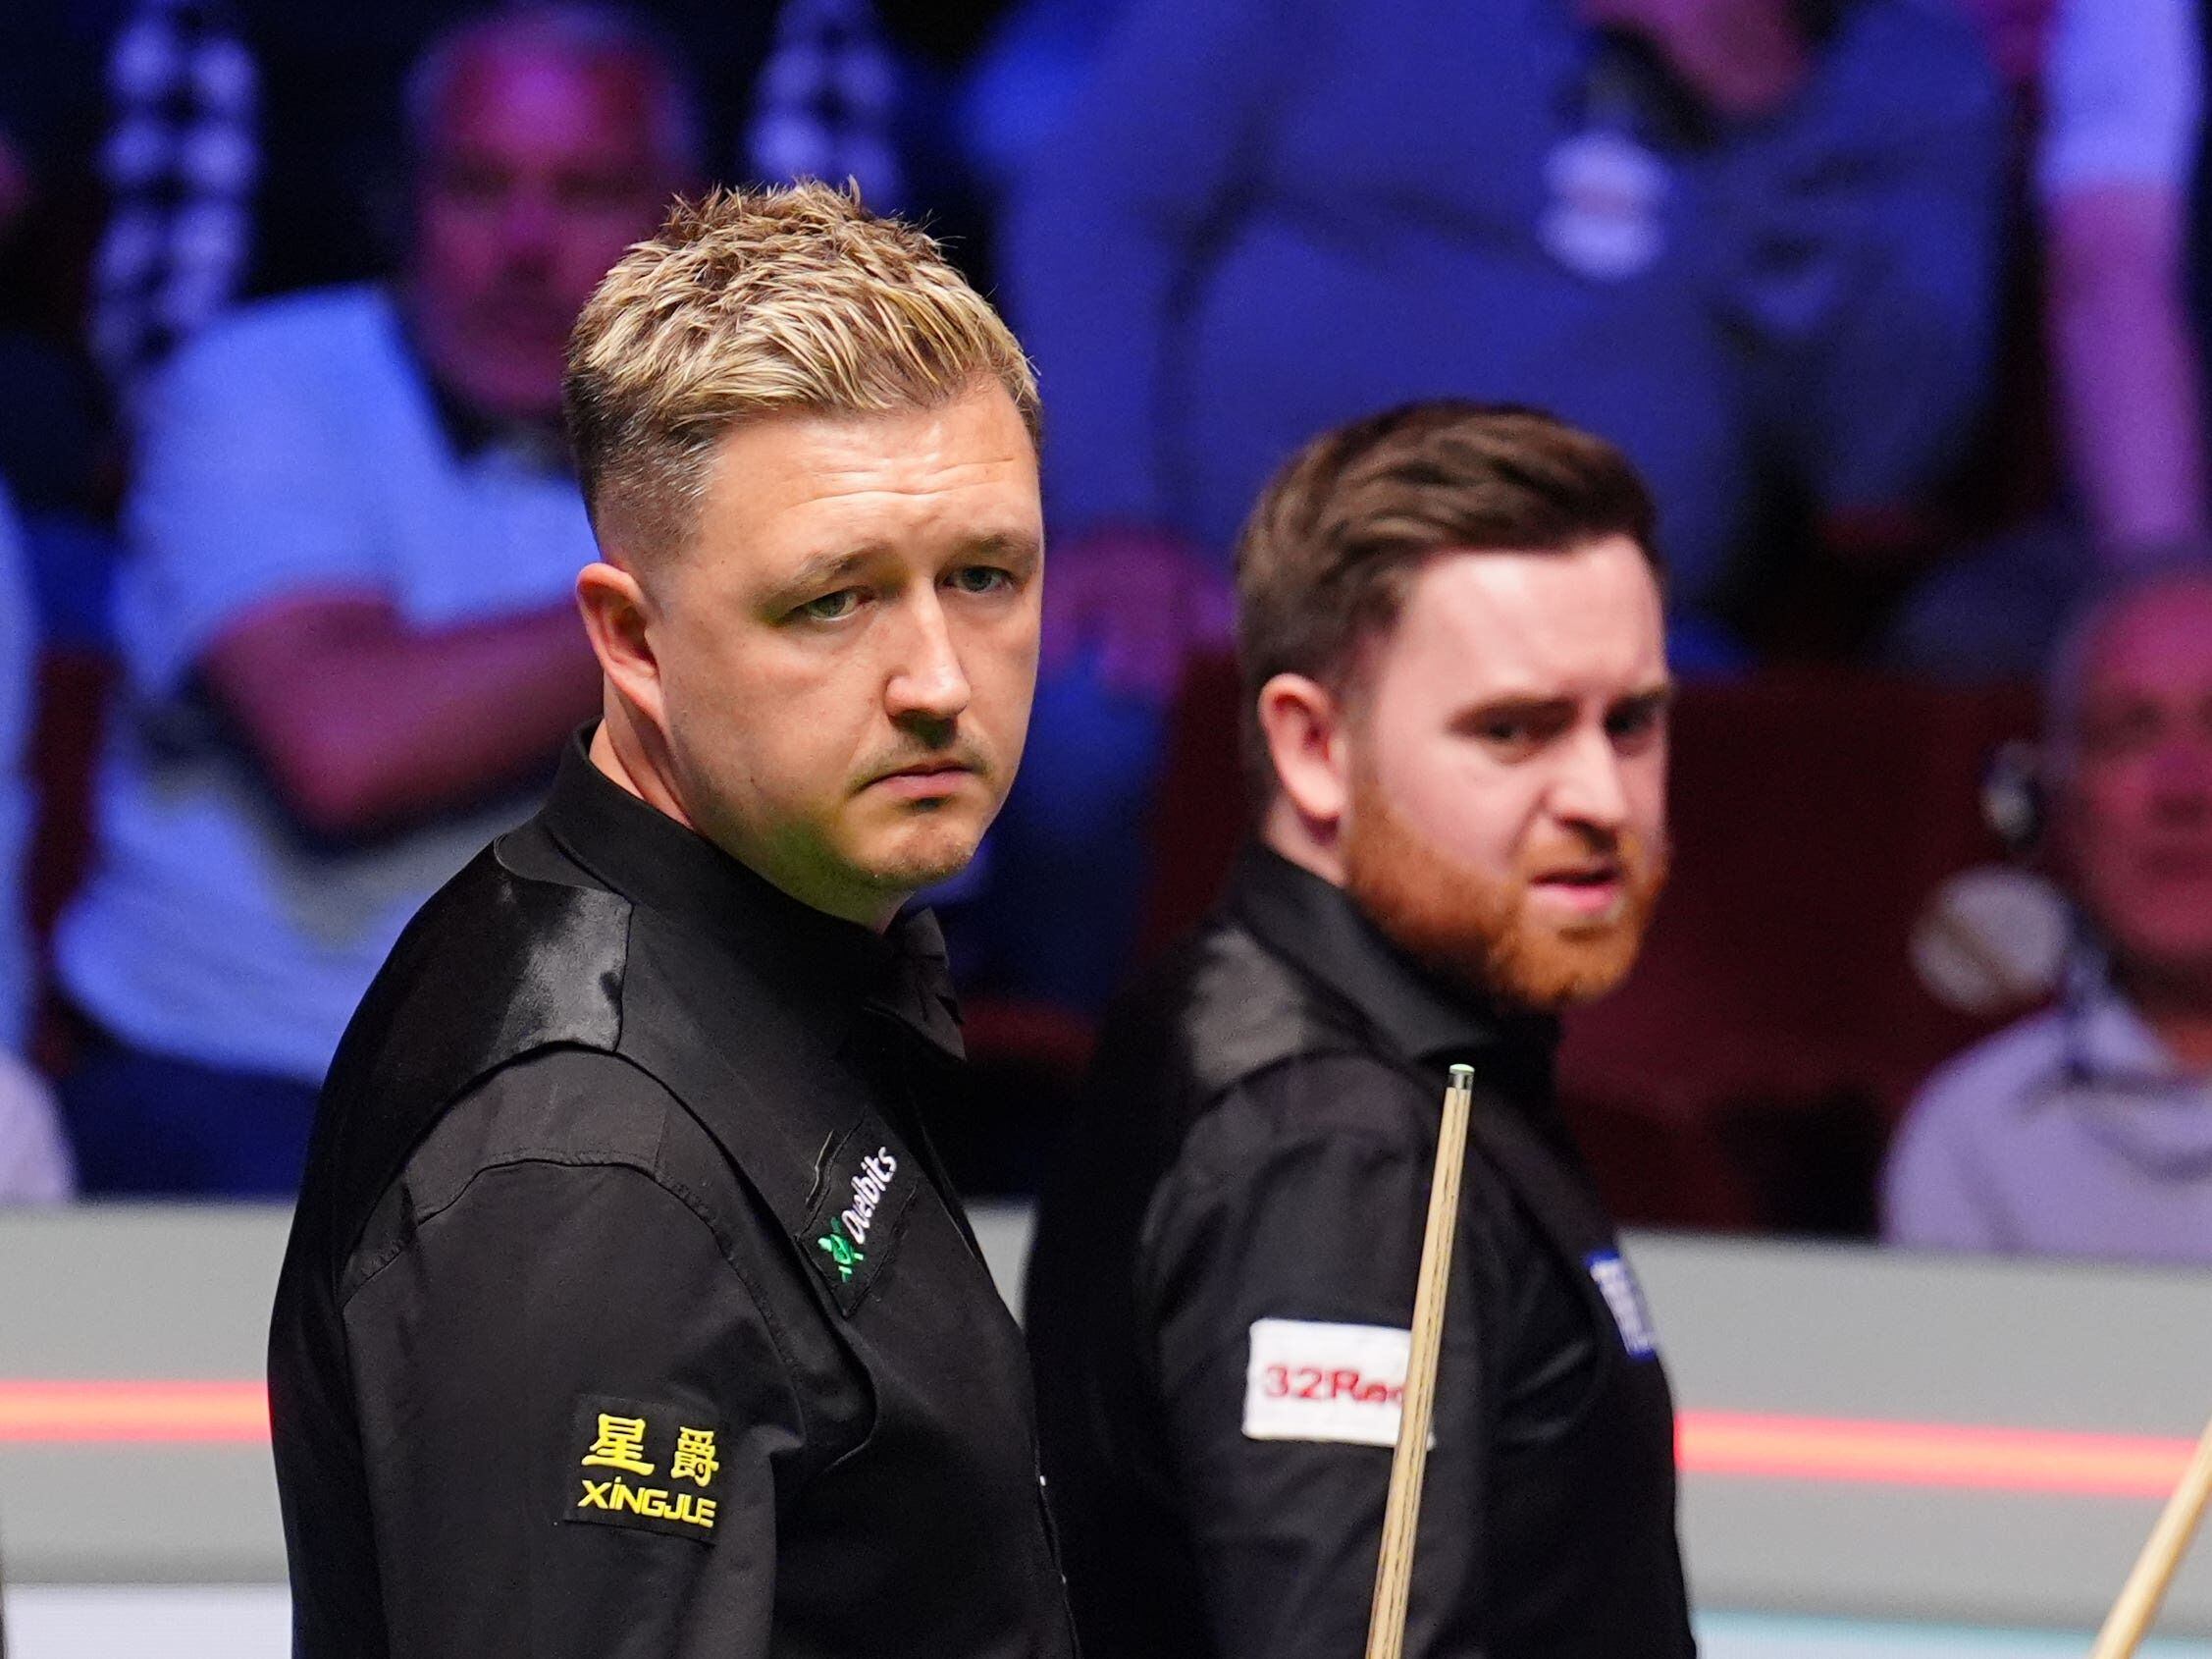 Kyren Wilson on top in World Championship final after checking Jak Jones rally